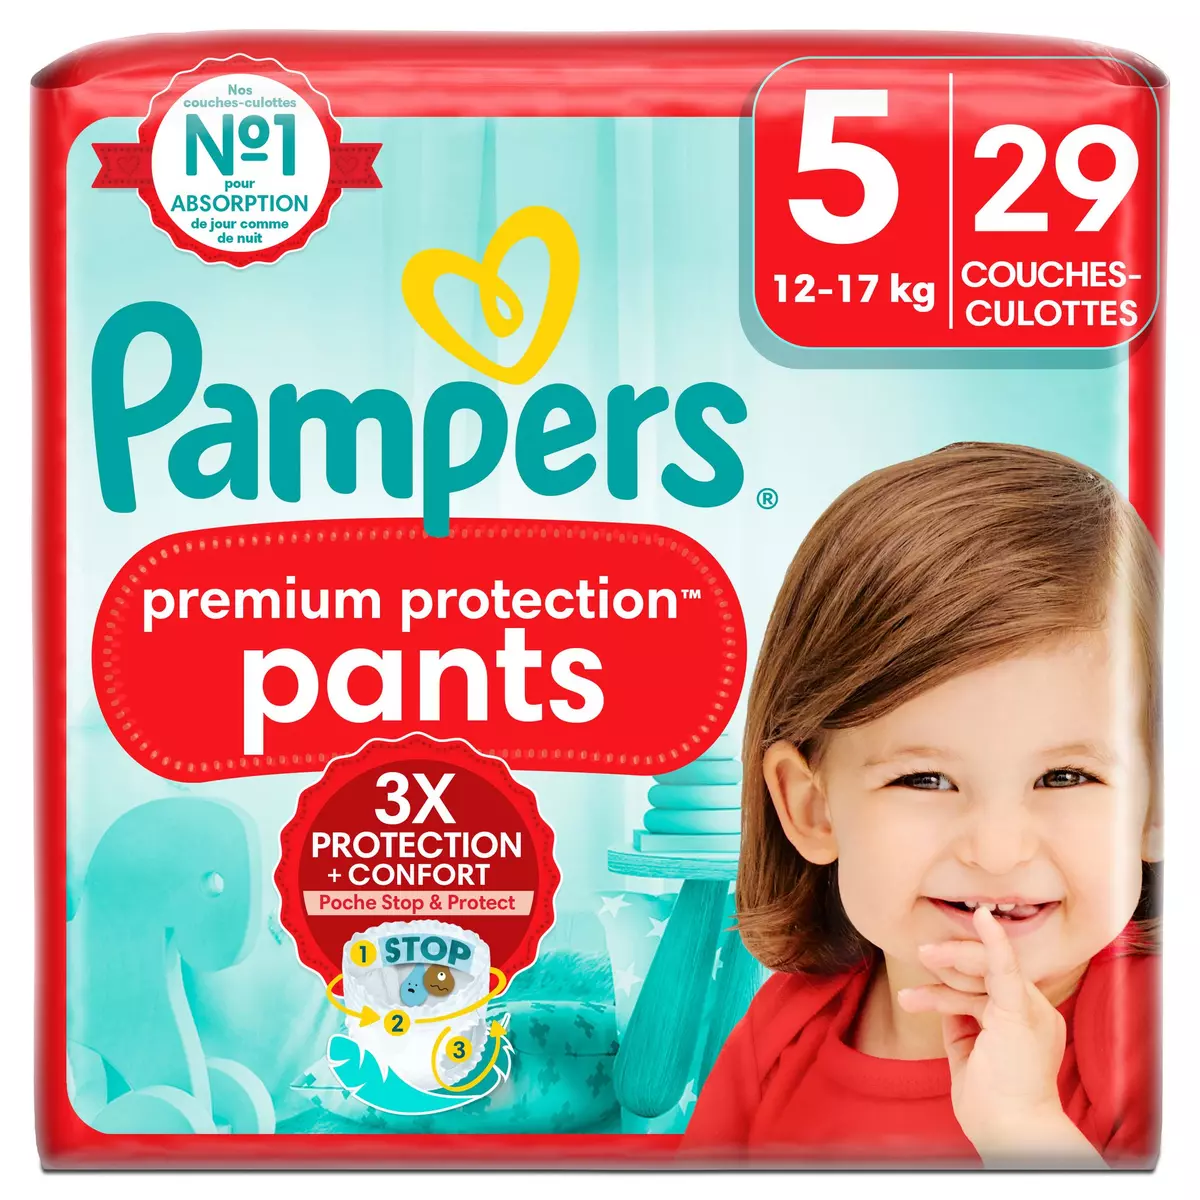 PAMPERS Premium protection couches culottes taille 5 (12-17kg) 29 couches  pas cher 